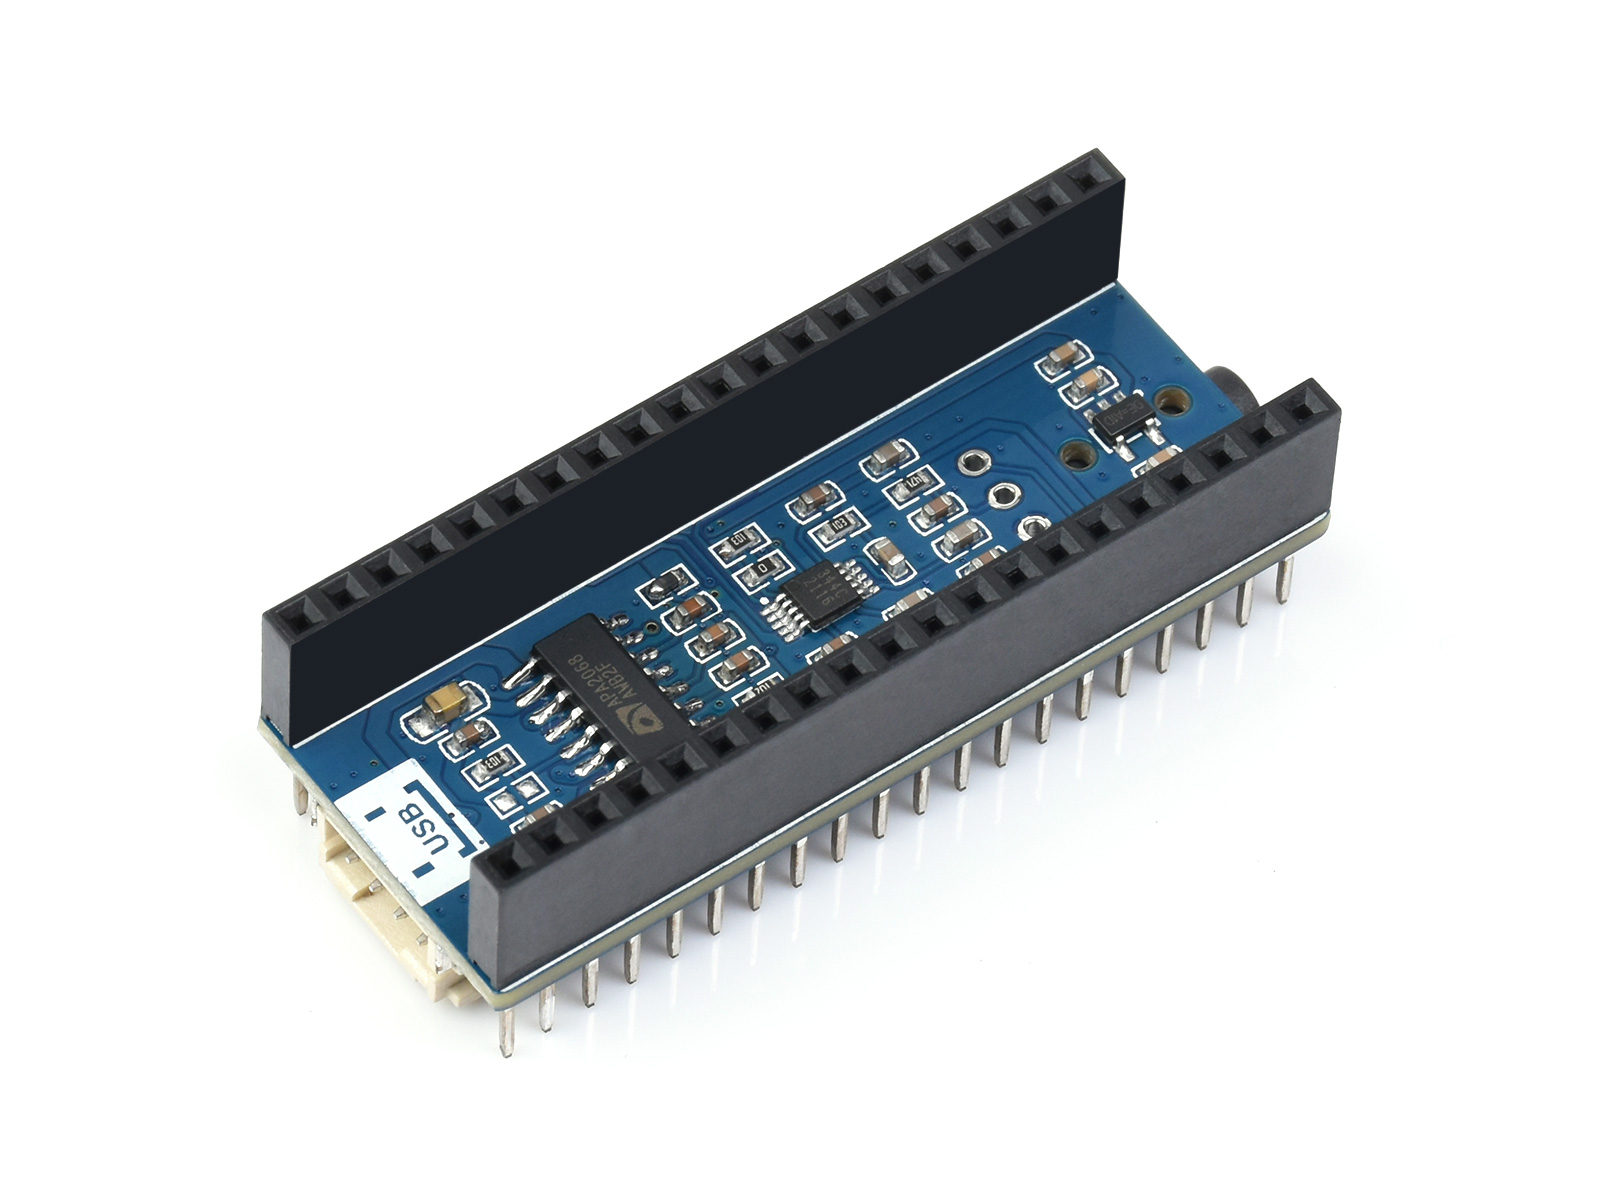 Audio Expansion Module for Raspberry Pi Pico, Concurrently Headphone / Speaker Output